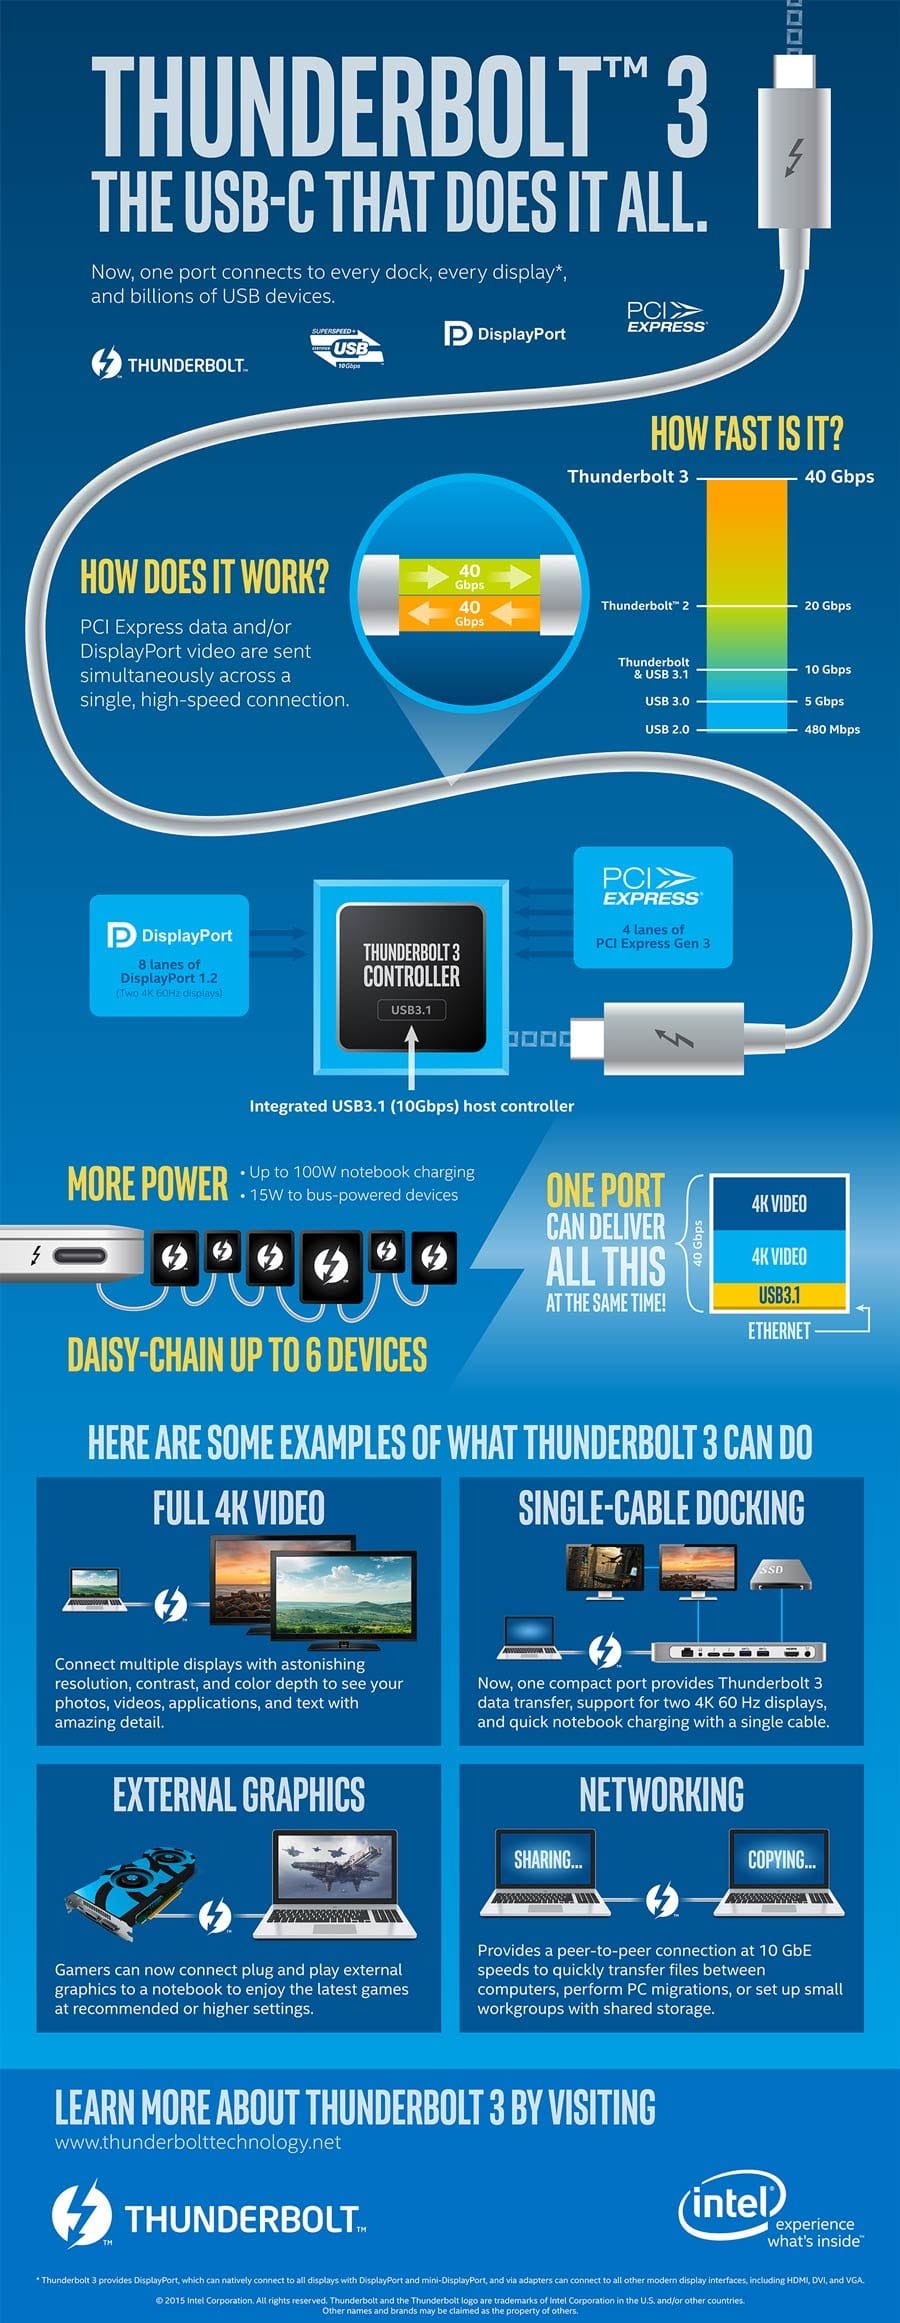 Intel: Thunderbolt 3: The USB-C That Does It All